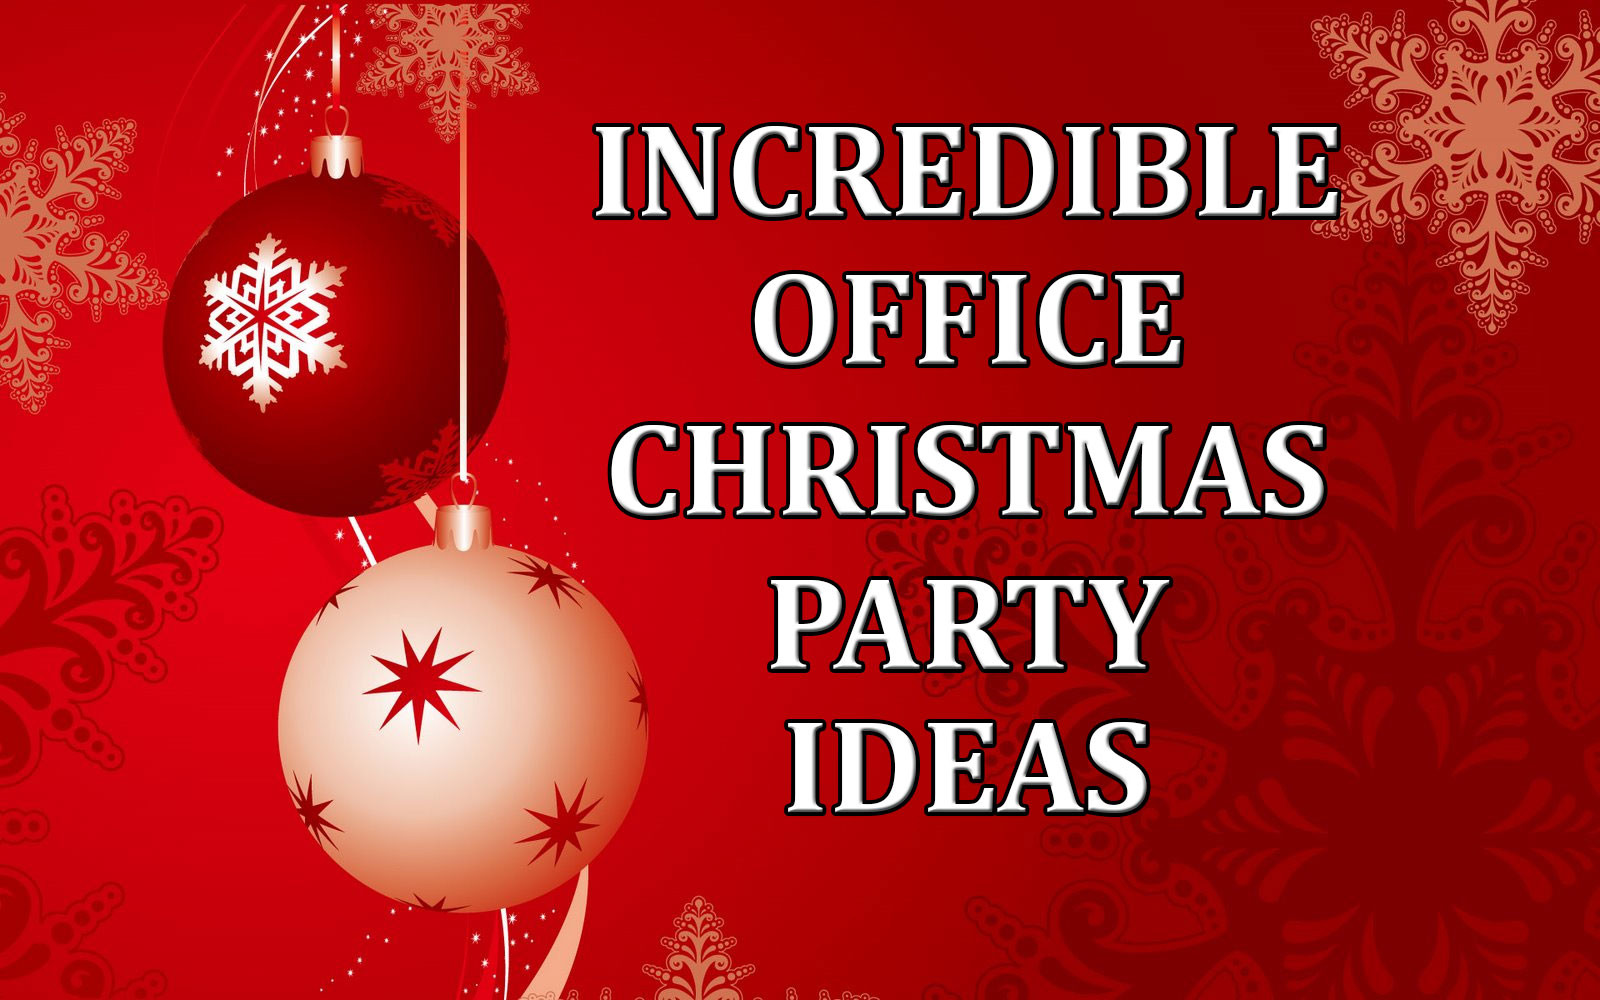 Fun Ideas For Holiday Party
 Incredible fice Christmas Party Ideas edy Ventriloquist